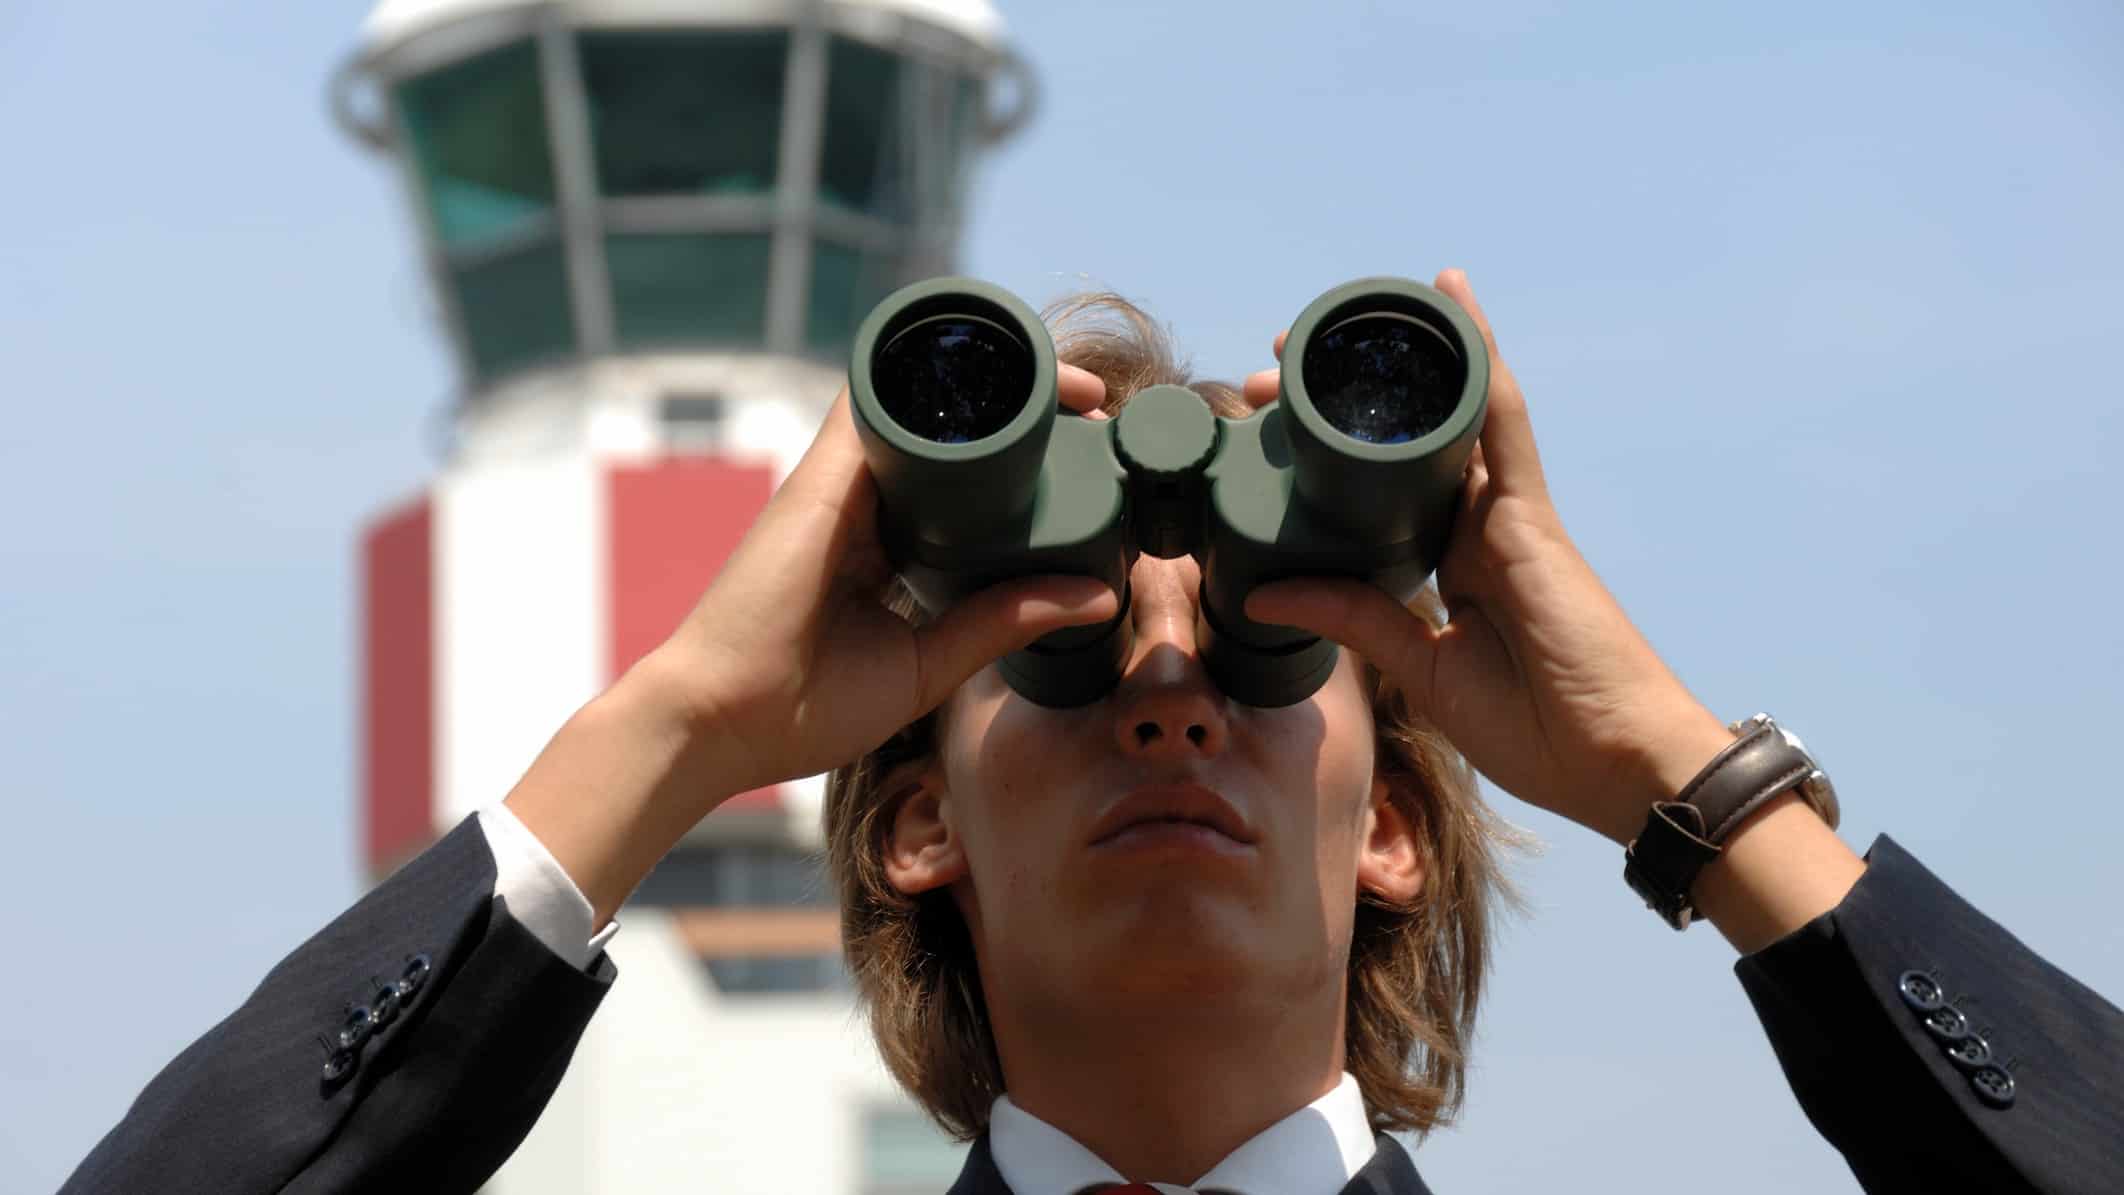 Man in suit looks through binoculars in front of a control tower at an airport.